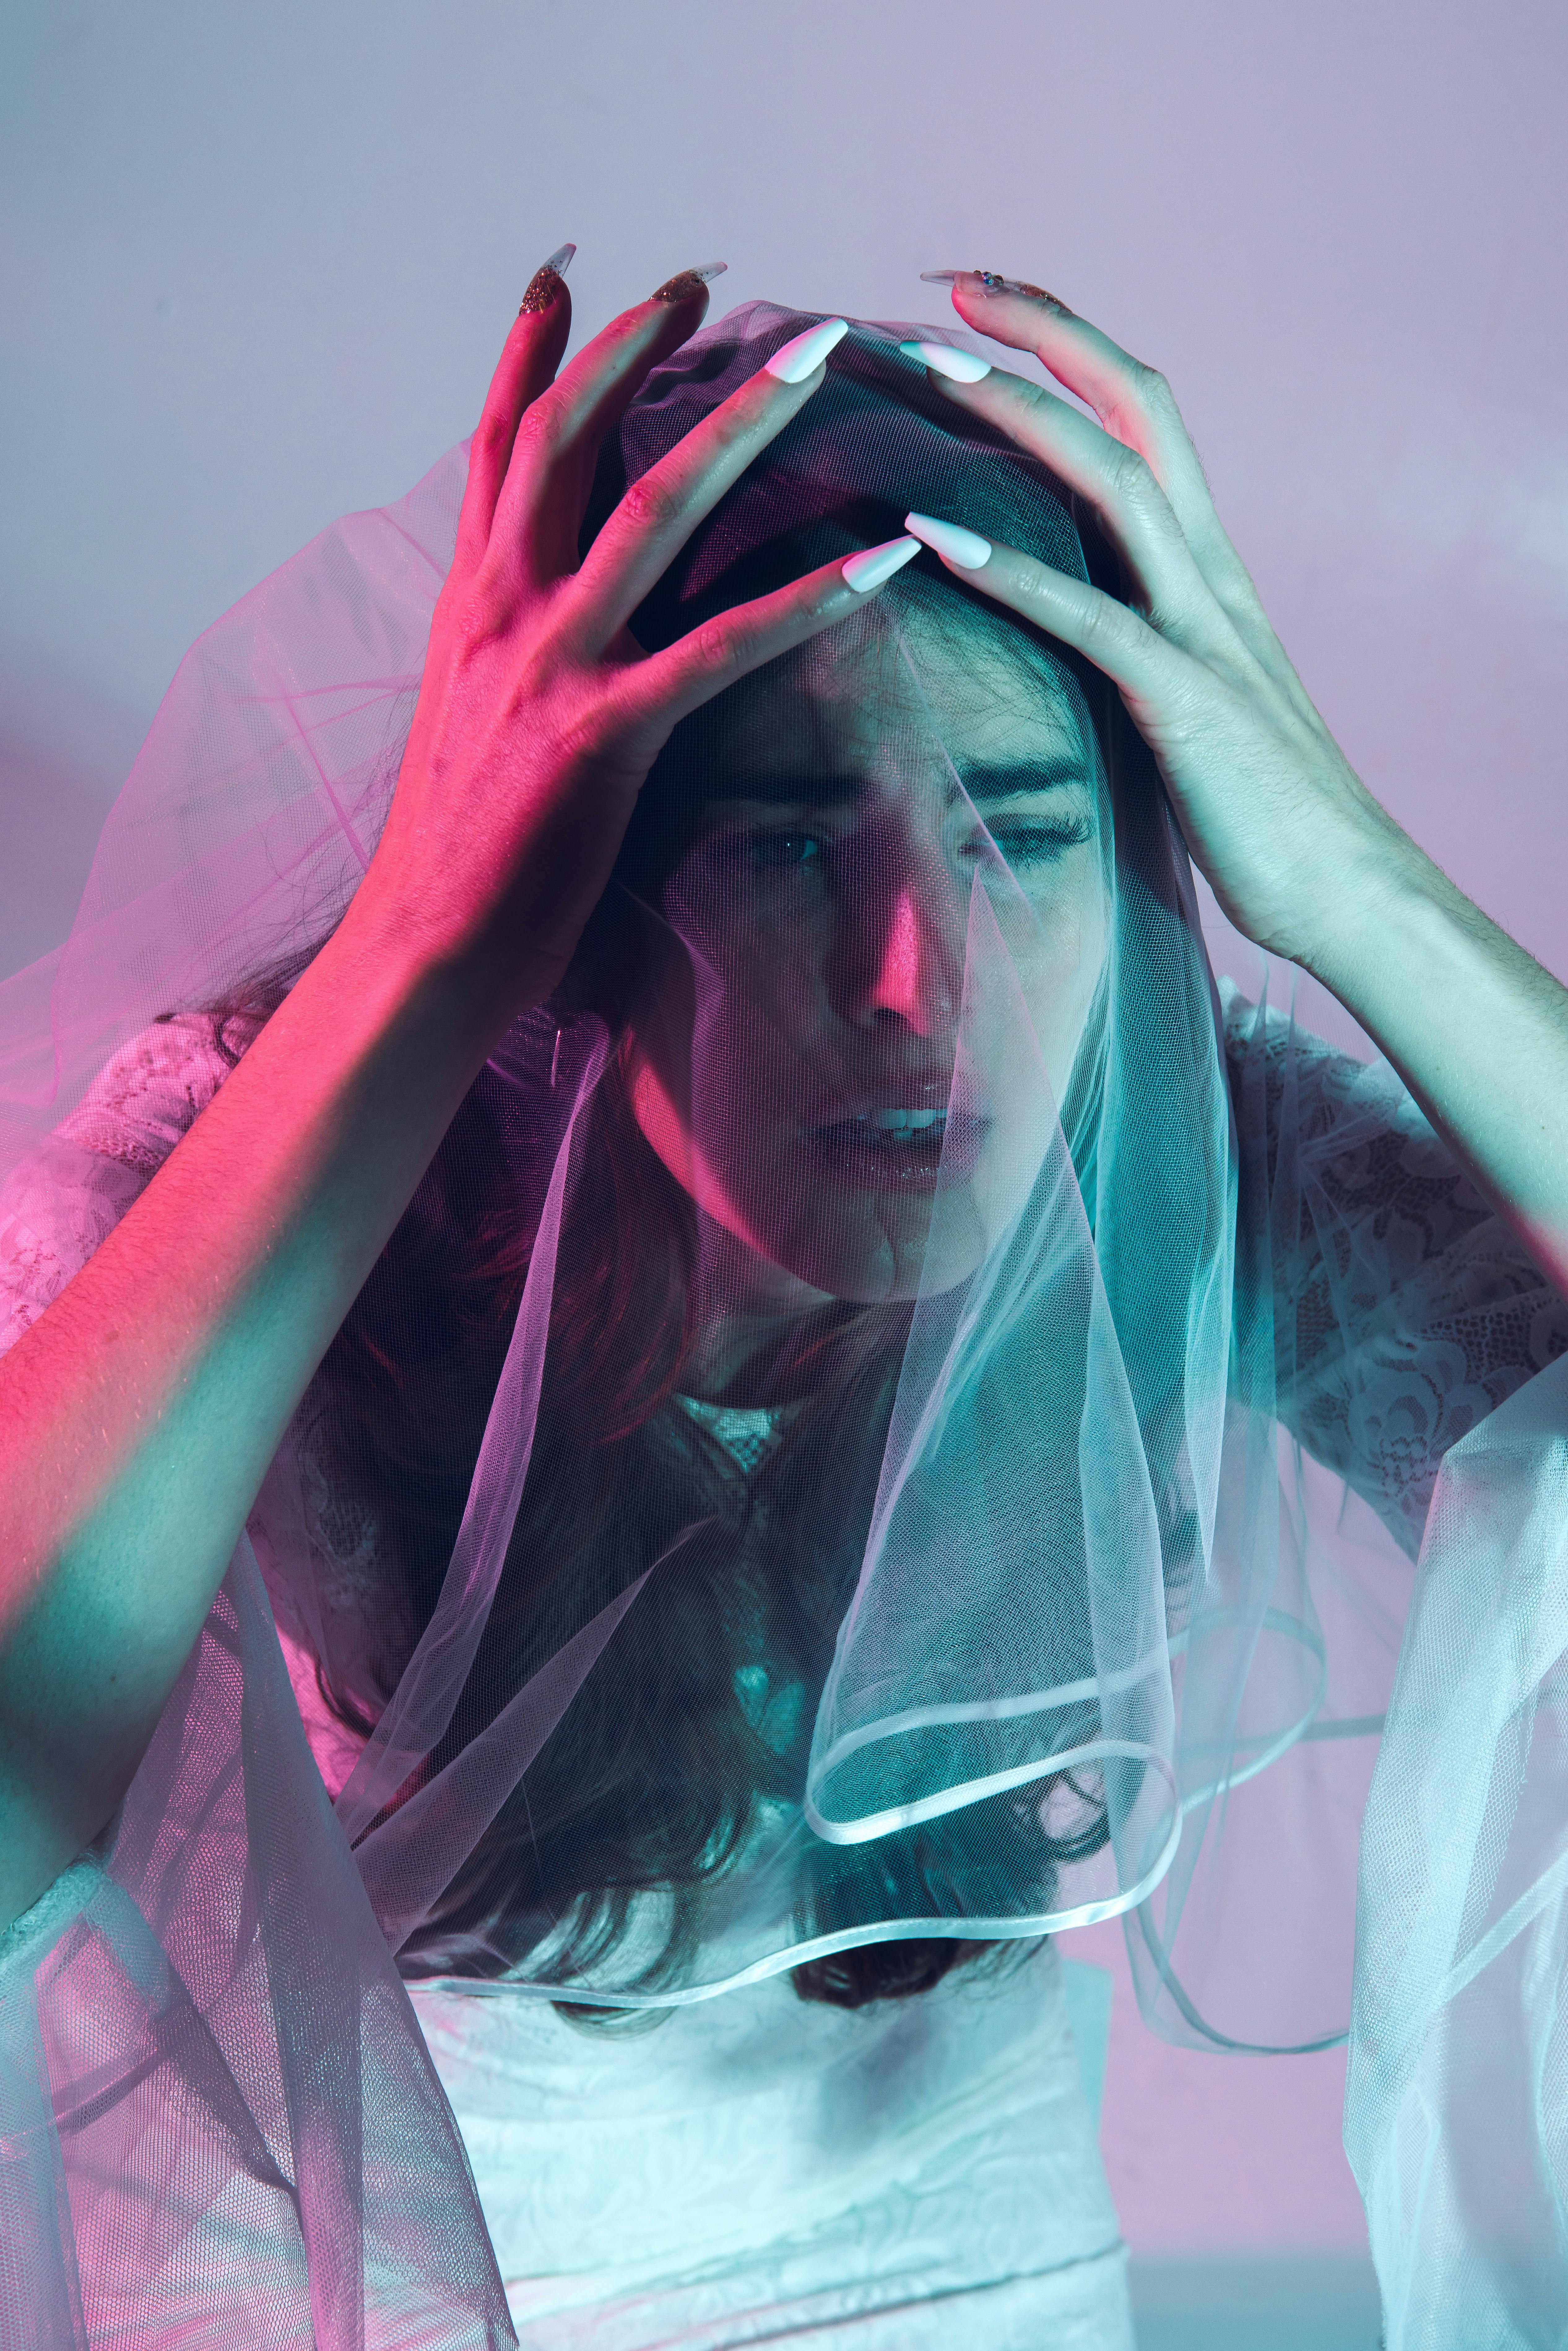 An upset and stressed out bride | Source: Pexels